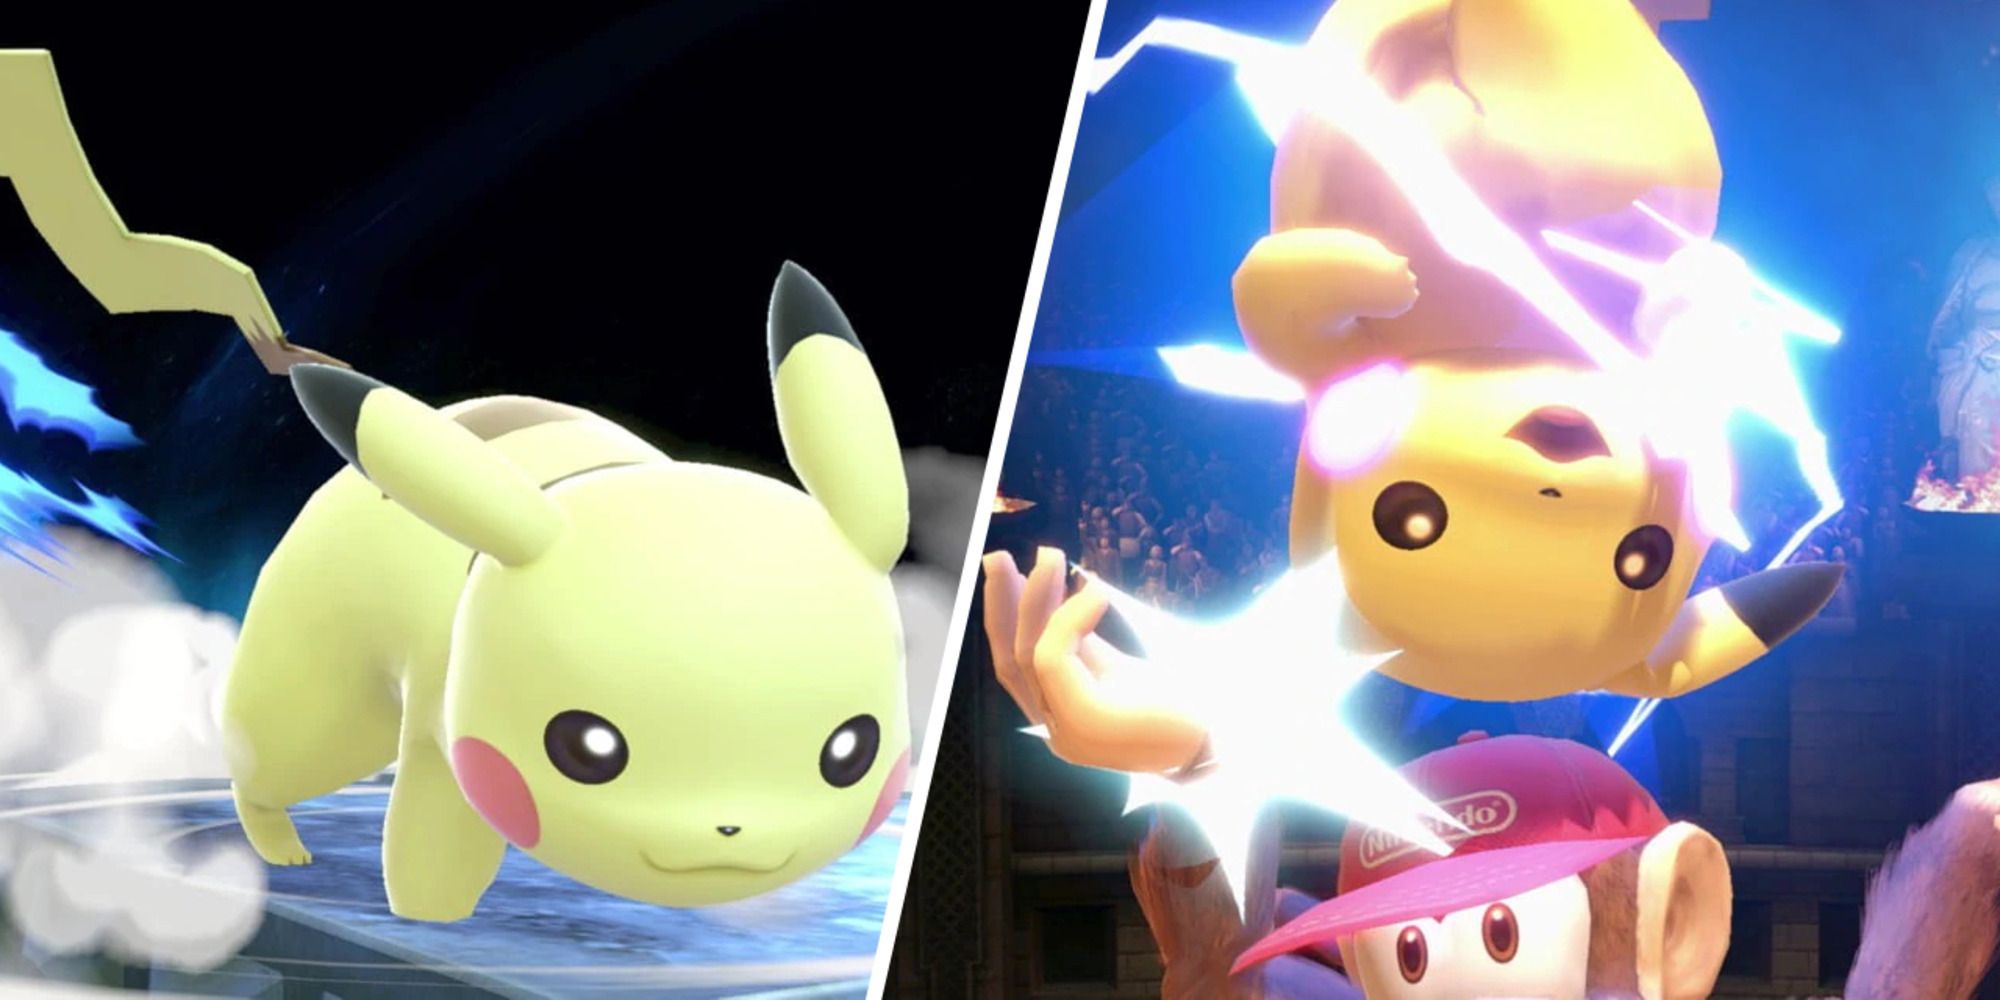 Pikachu using Down-Tilt on the left and using DAir on Diddy Kong on the right in Super Smash Bros. Ultimate.